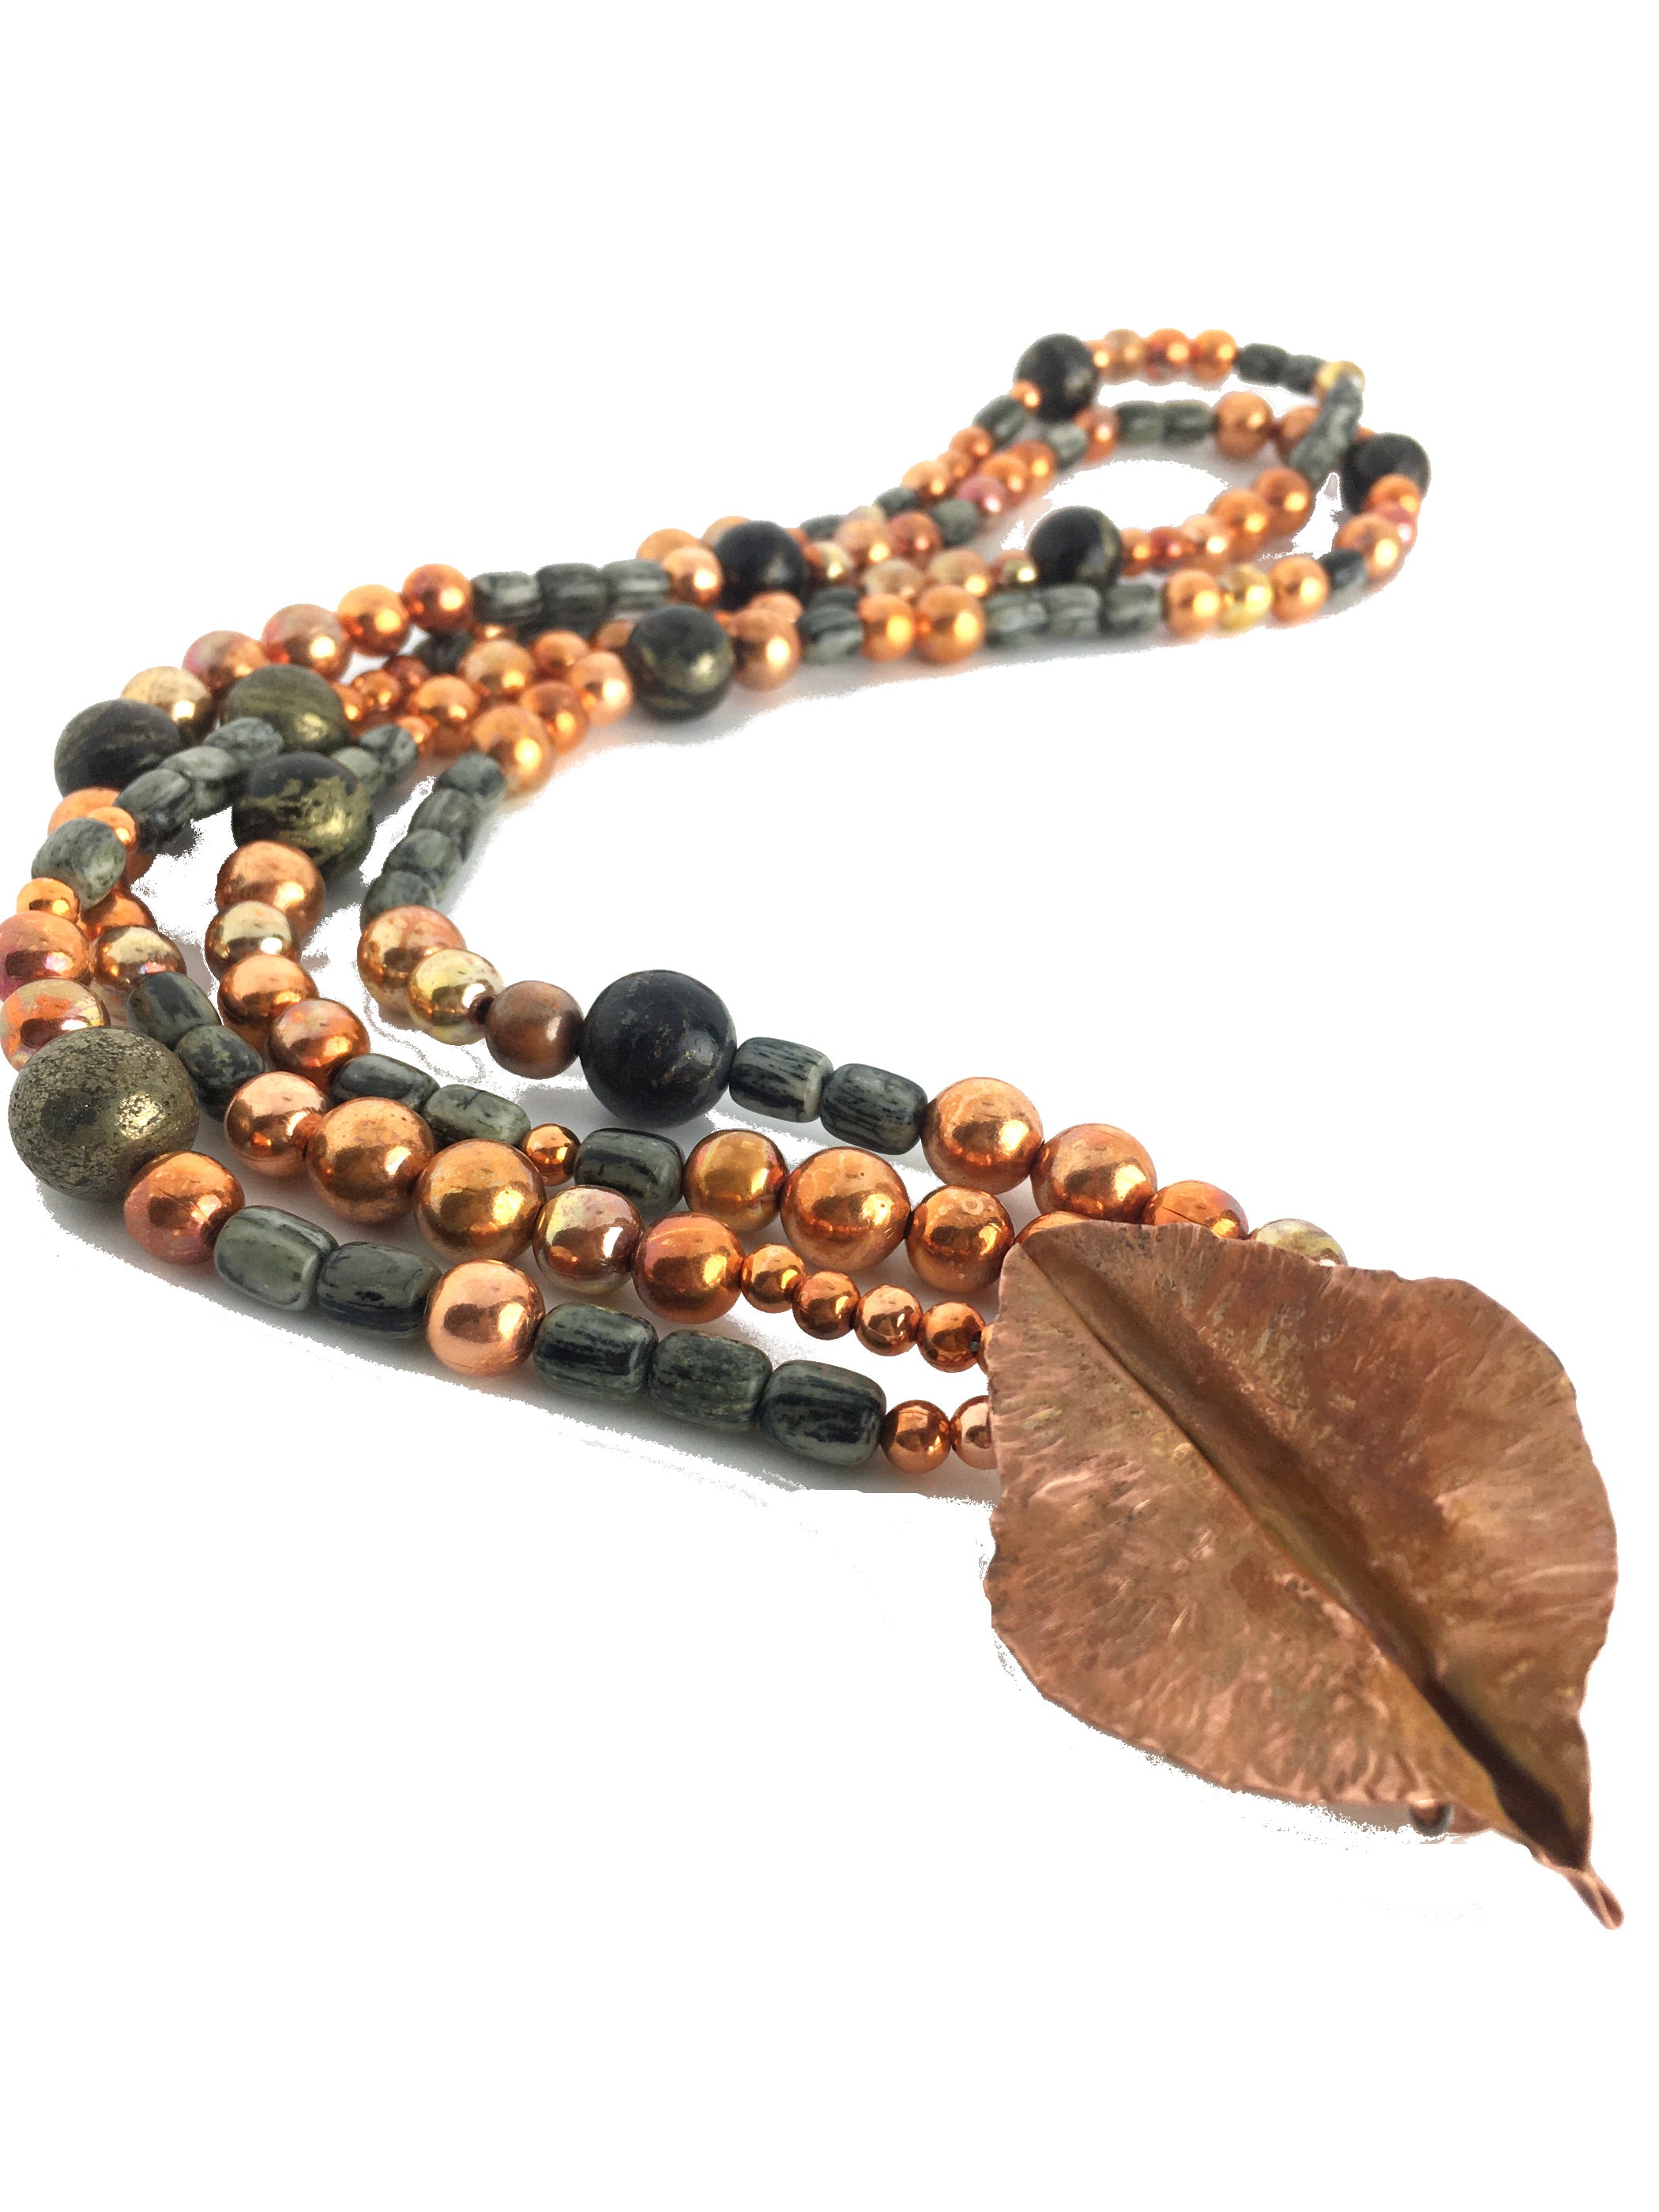 Double Strand Arizona Gemstone Sonoran Sunset Necklace with Hand Forged Copper Leaf